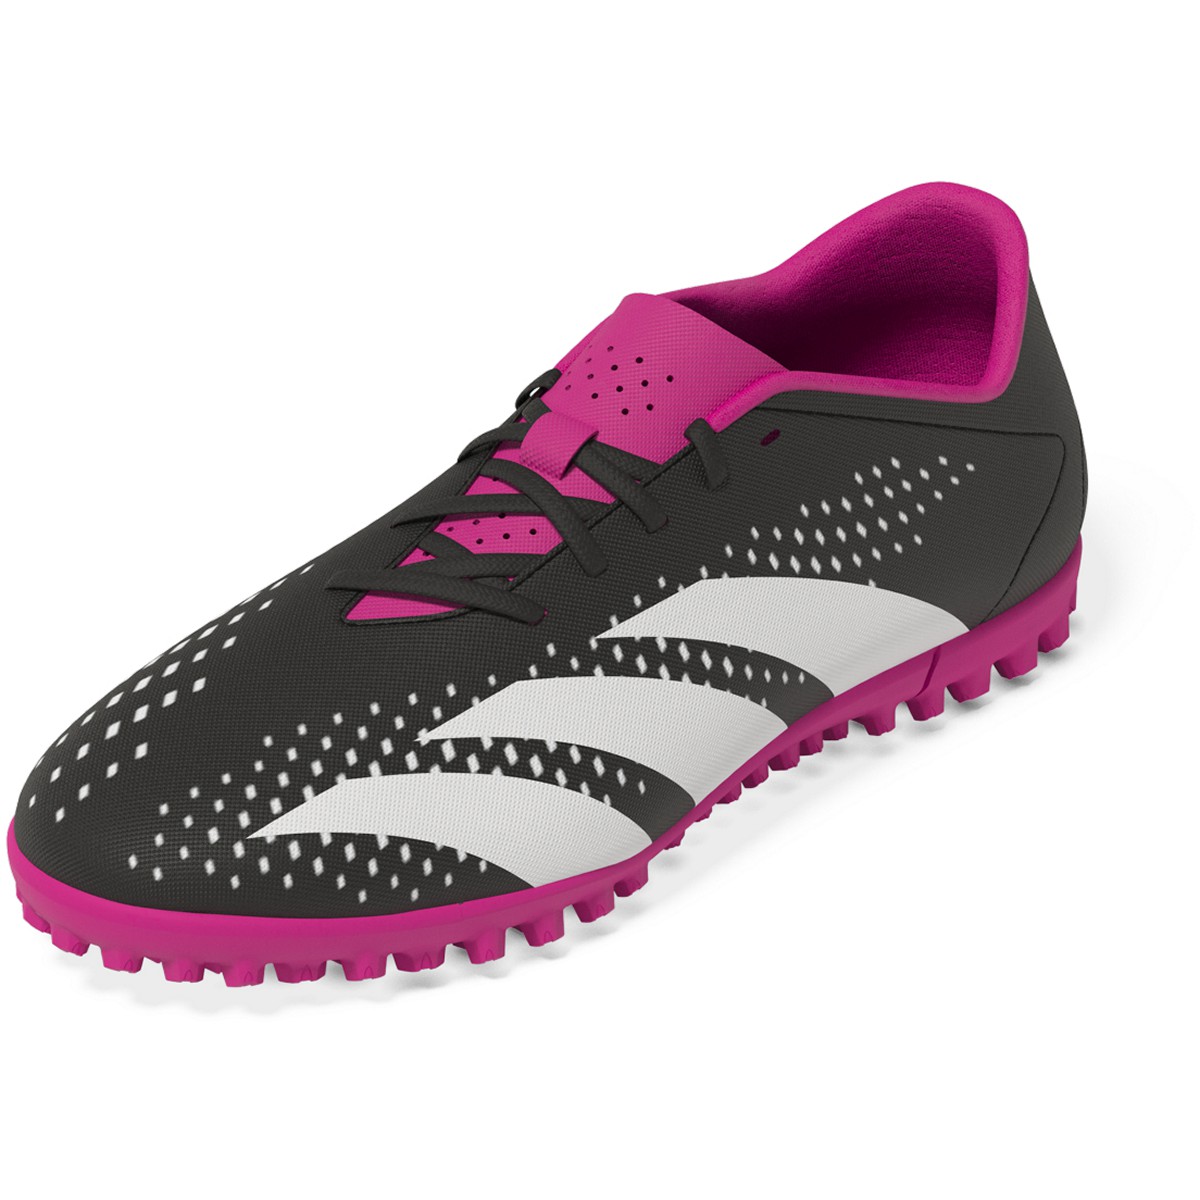 Pink Soccer Soccer Predator USA TF - adidas Unlimited Youth Black/White/Shock Core Shoes ACCURACY.4 |